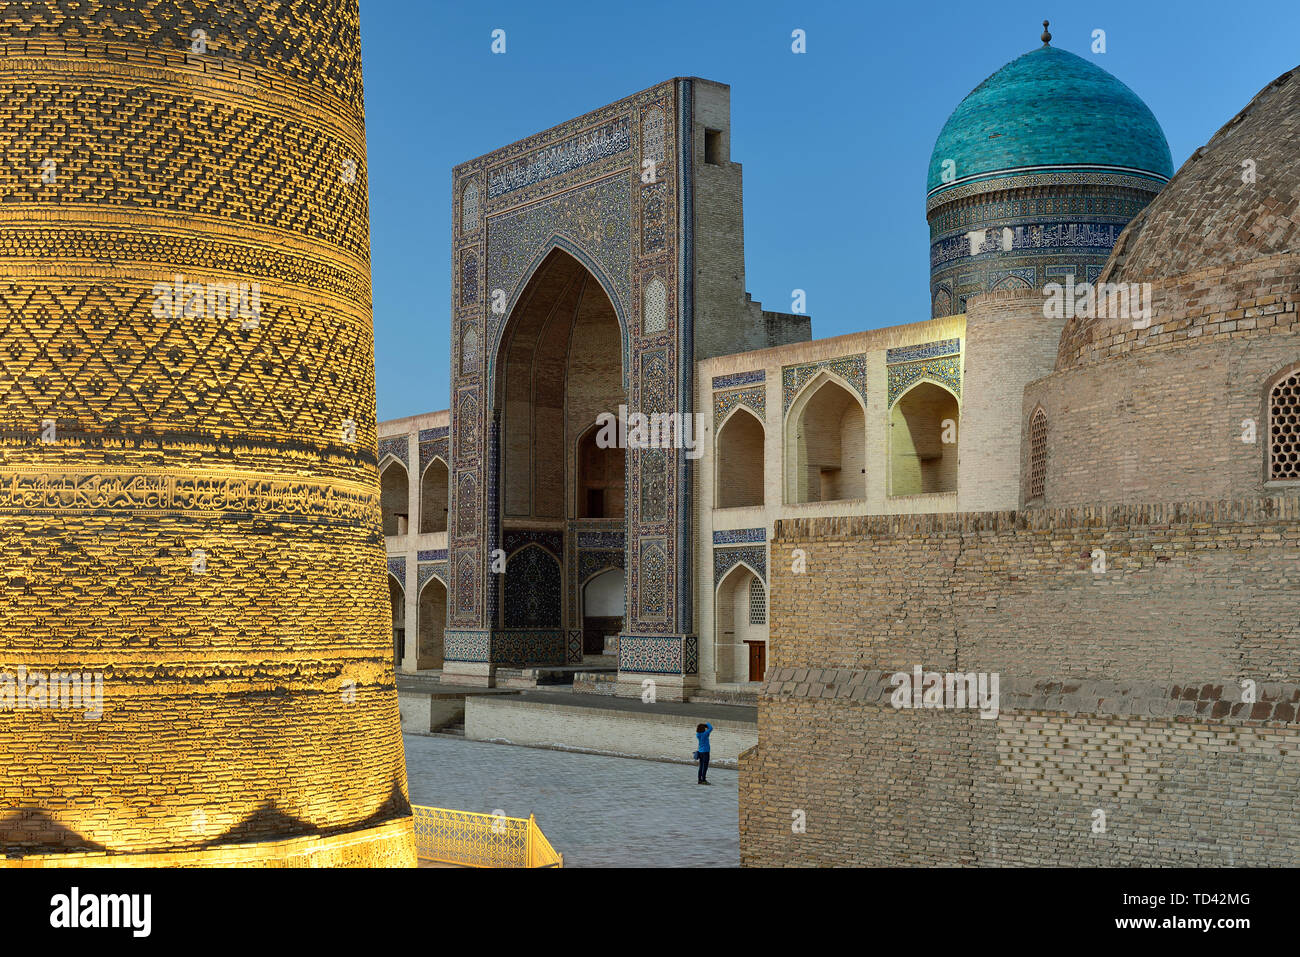 The tourist is making the photograph on the  main square in Bukhara where is Mir-i-Arab Medressa and Kalyan minaret, Uzbekistan. Stock Photo